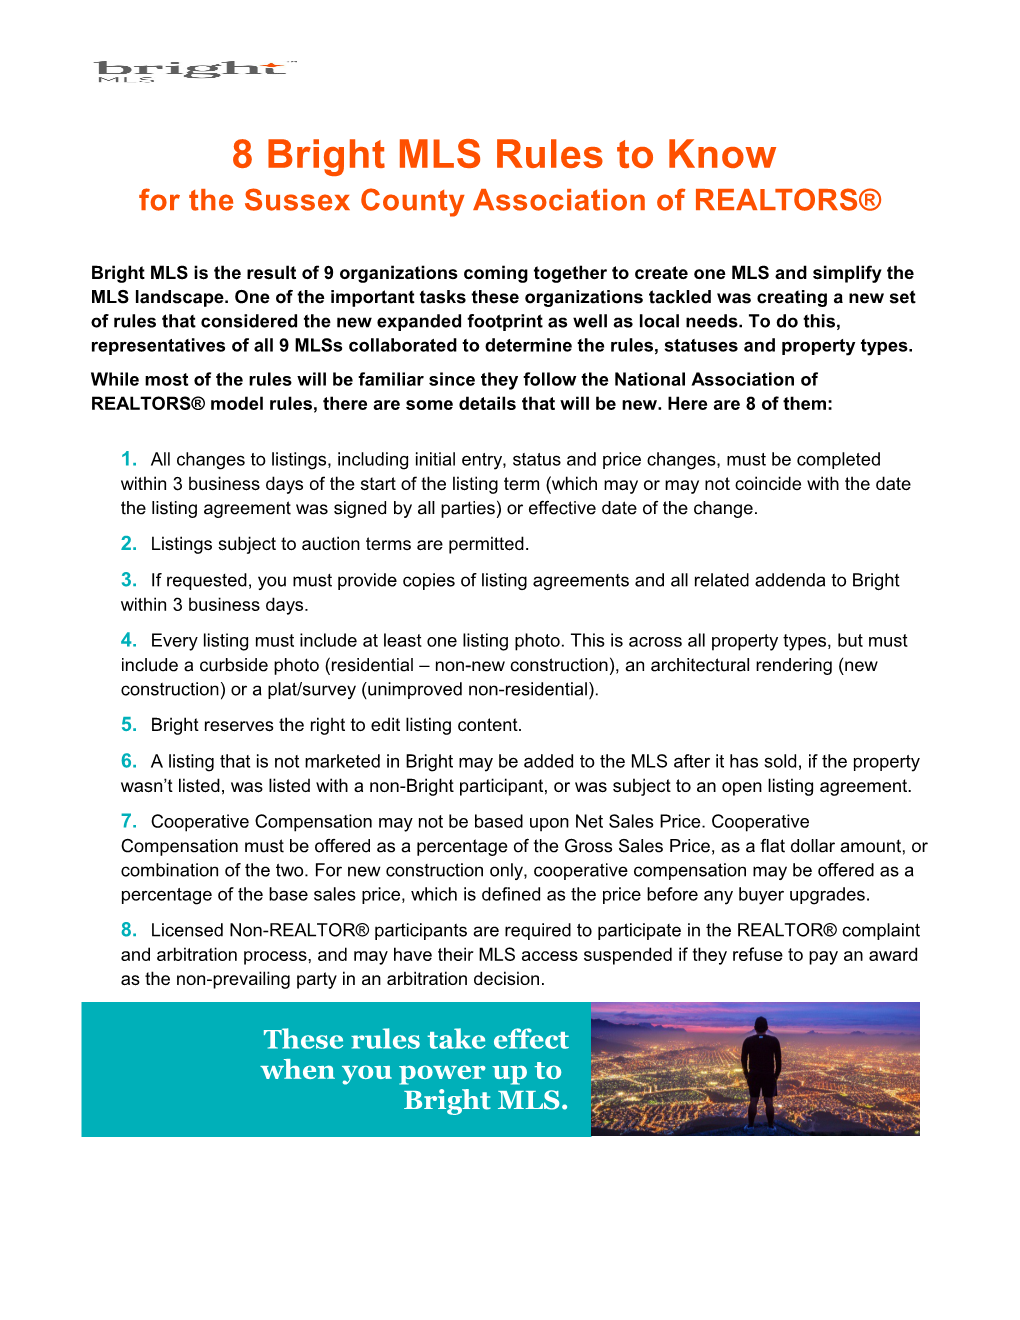 8 Bright MLS Rules to Know for the Sussex County Association of REALTORS